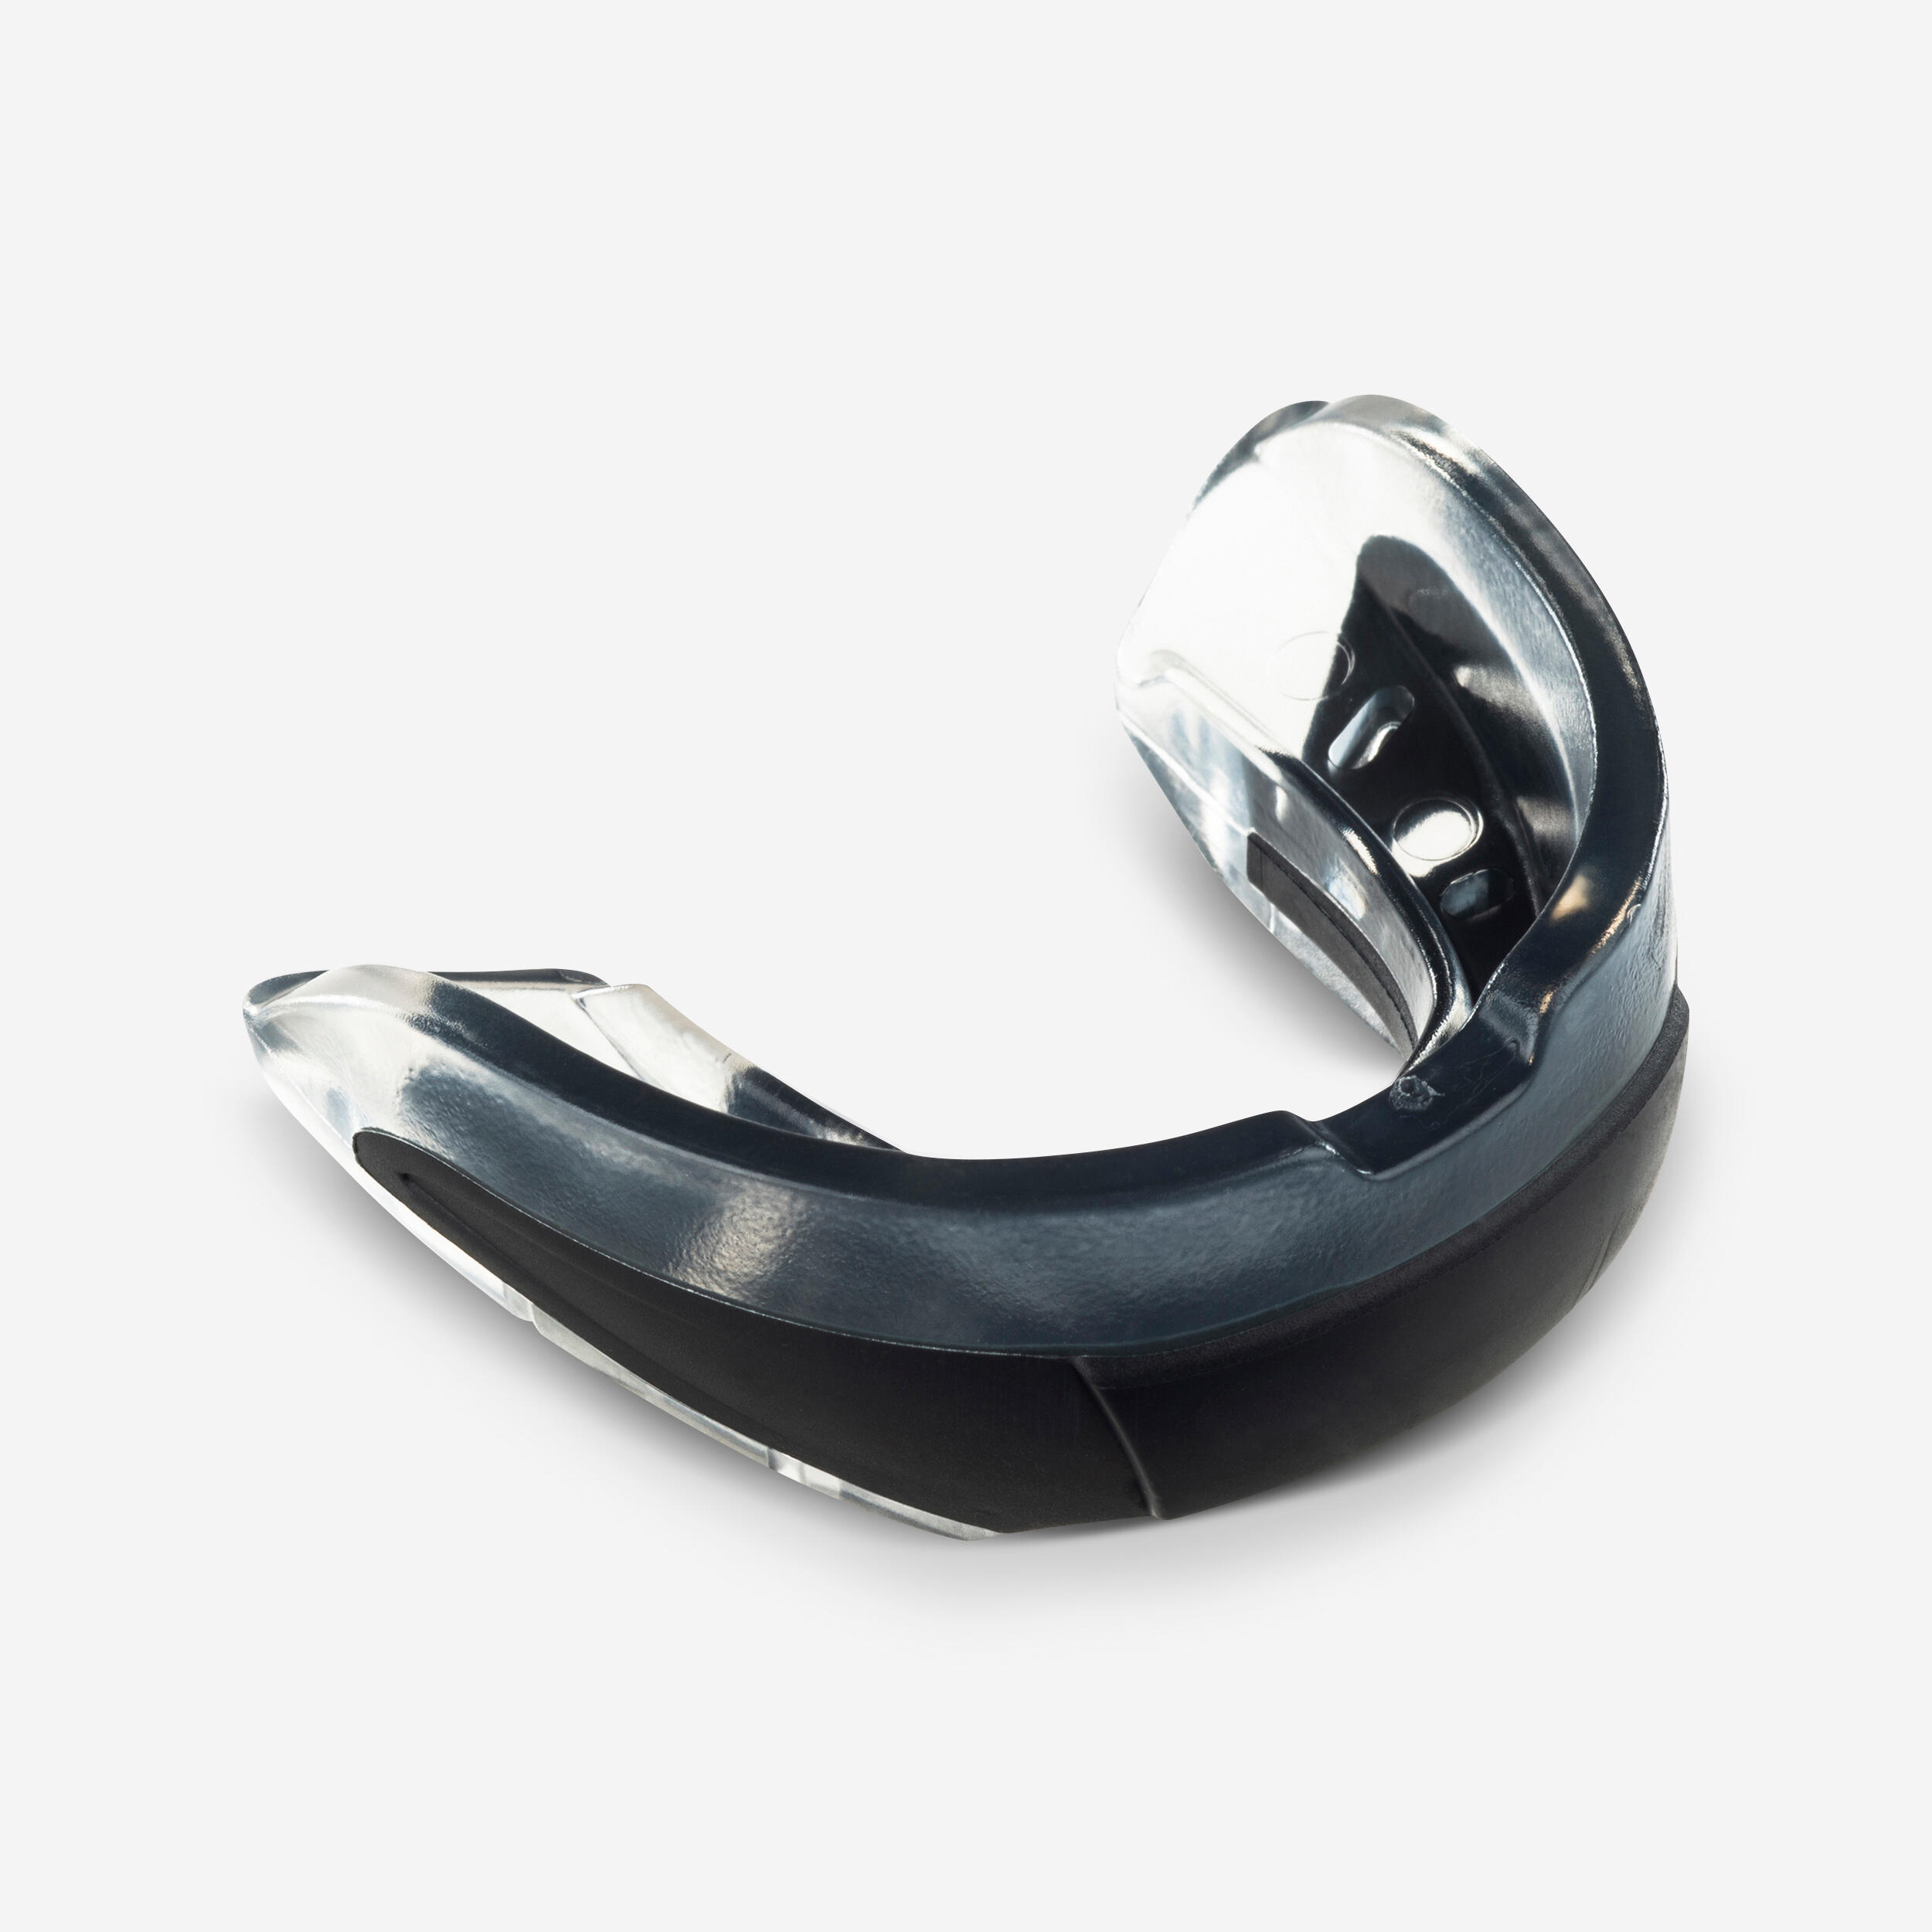 Rugby Mouthguard R500 Size M (Players 1.4 m To 1.7 m) - Black 1/6